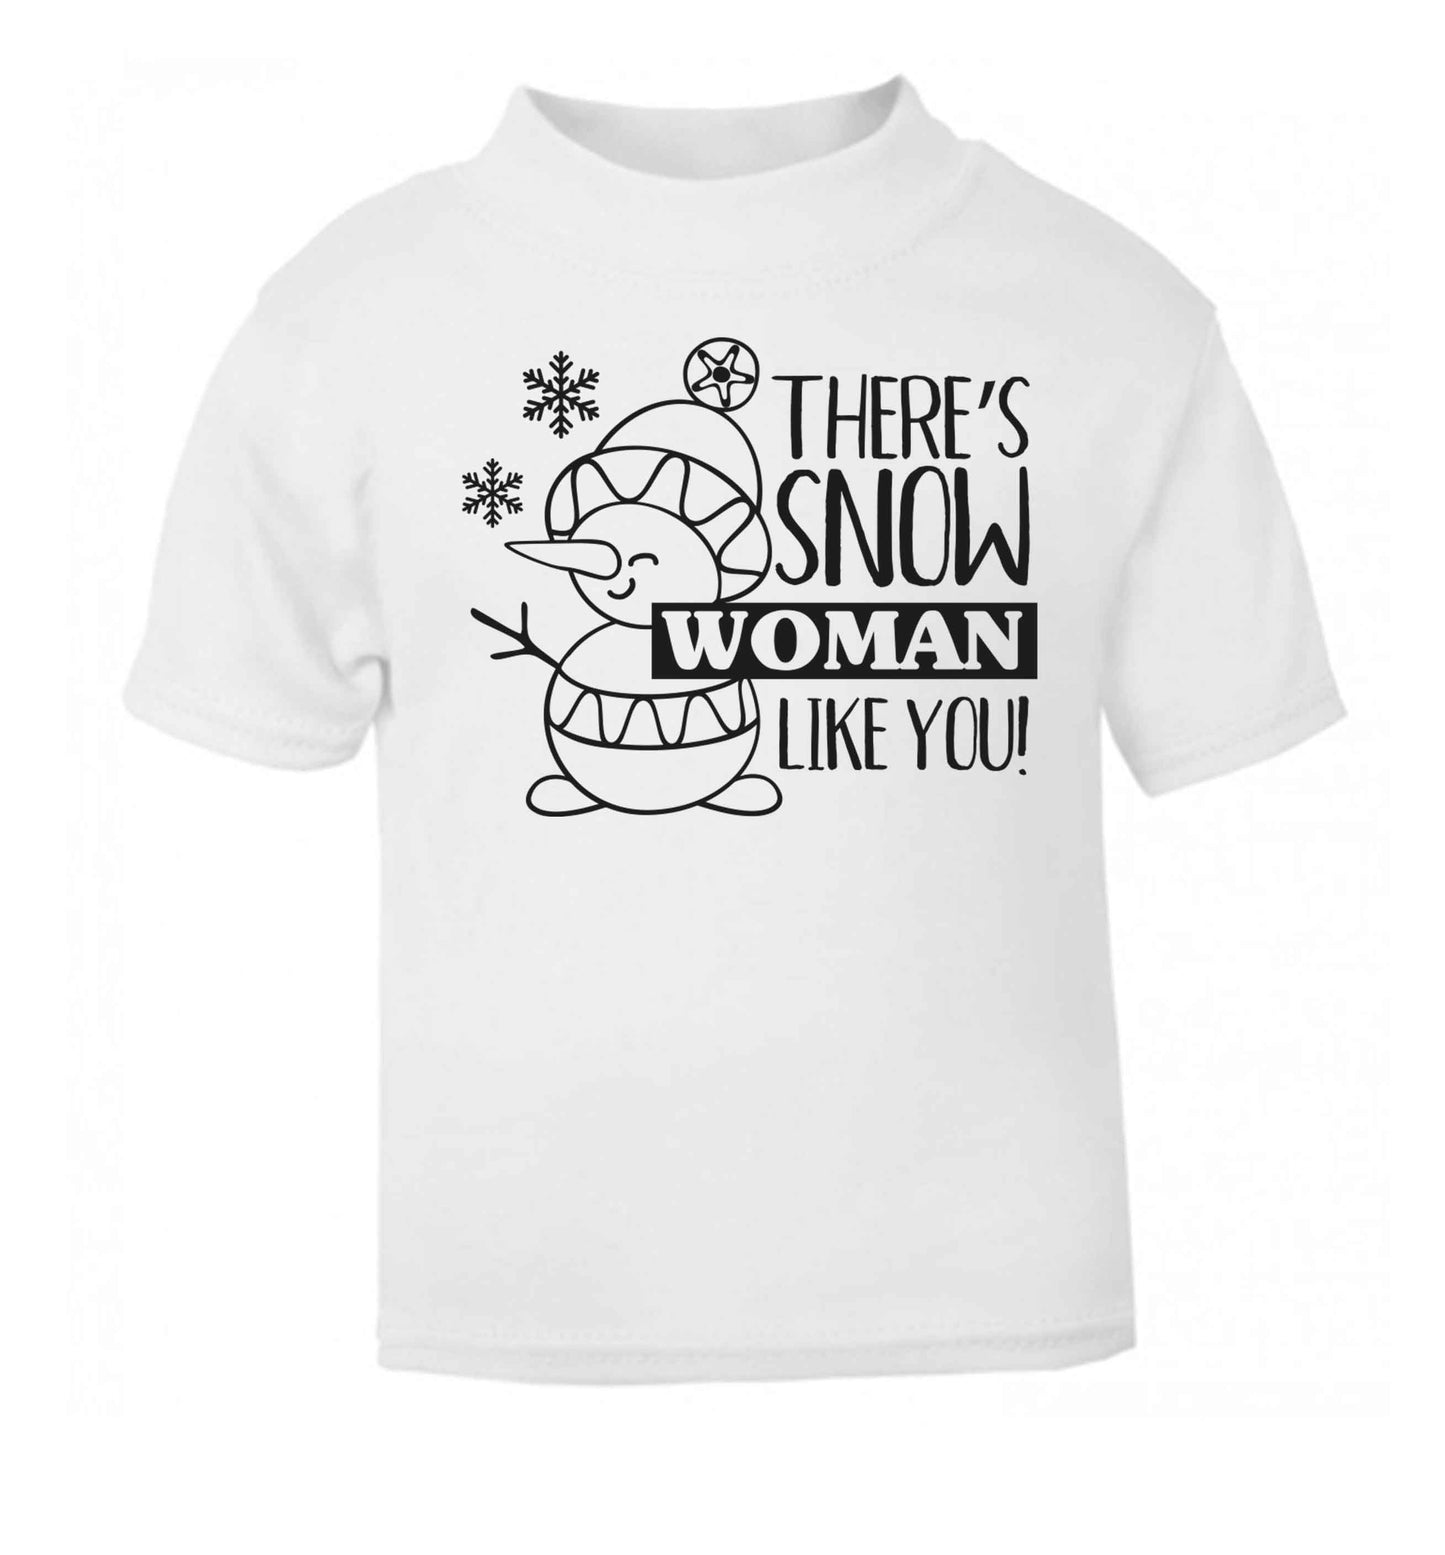 There's snow woman like you white baby toddler Tshirt 2 Years